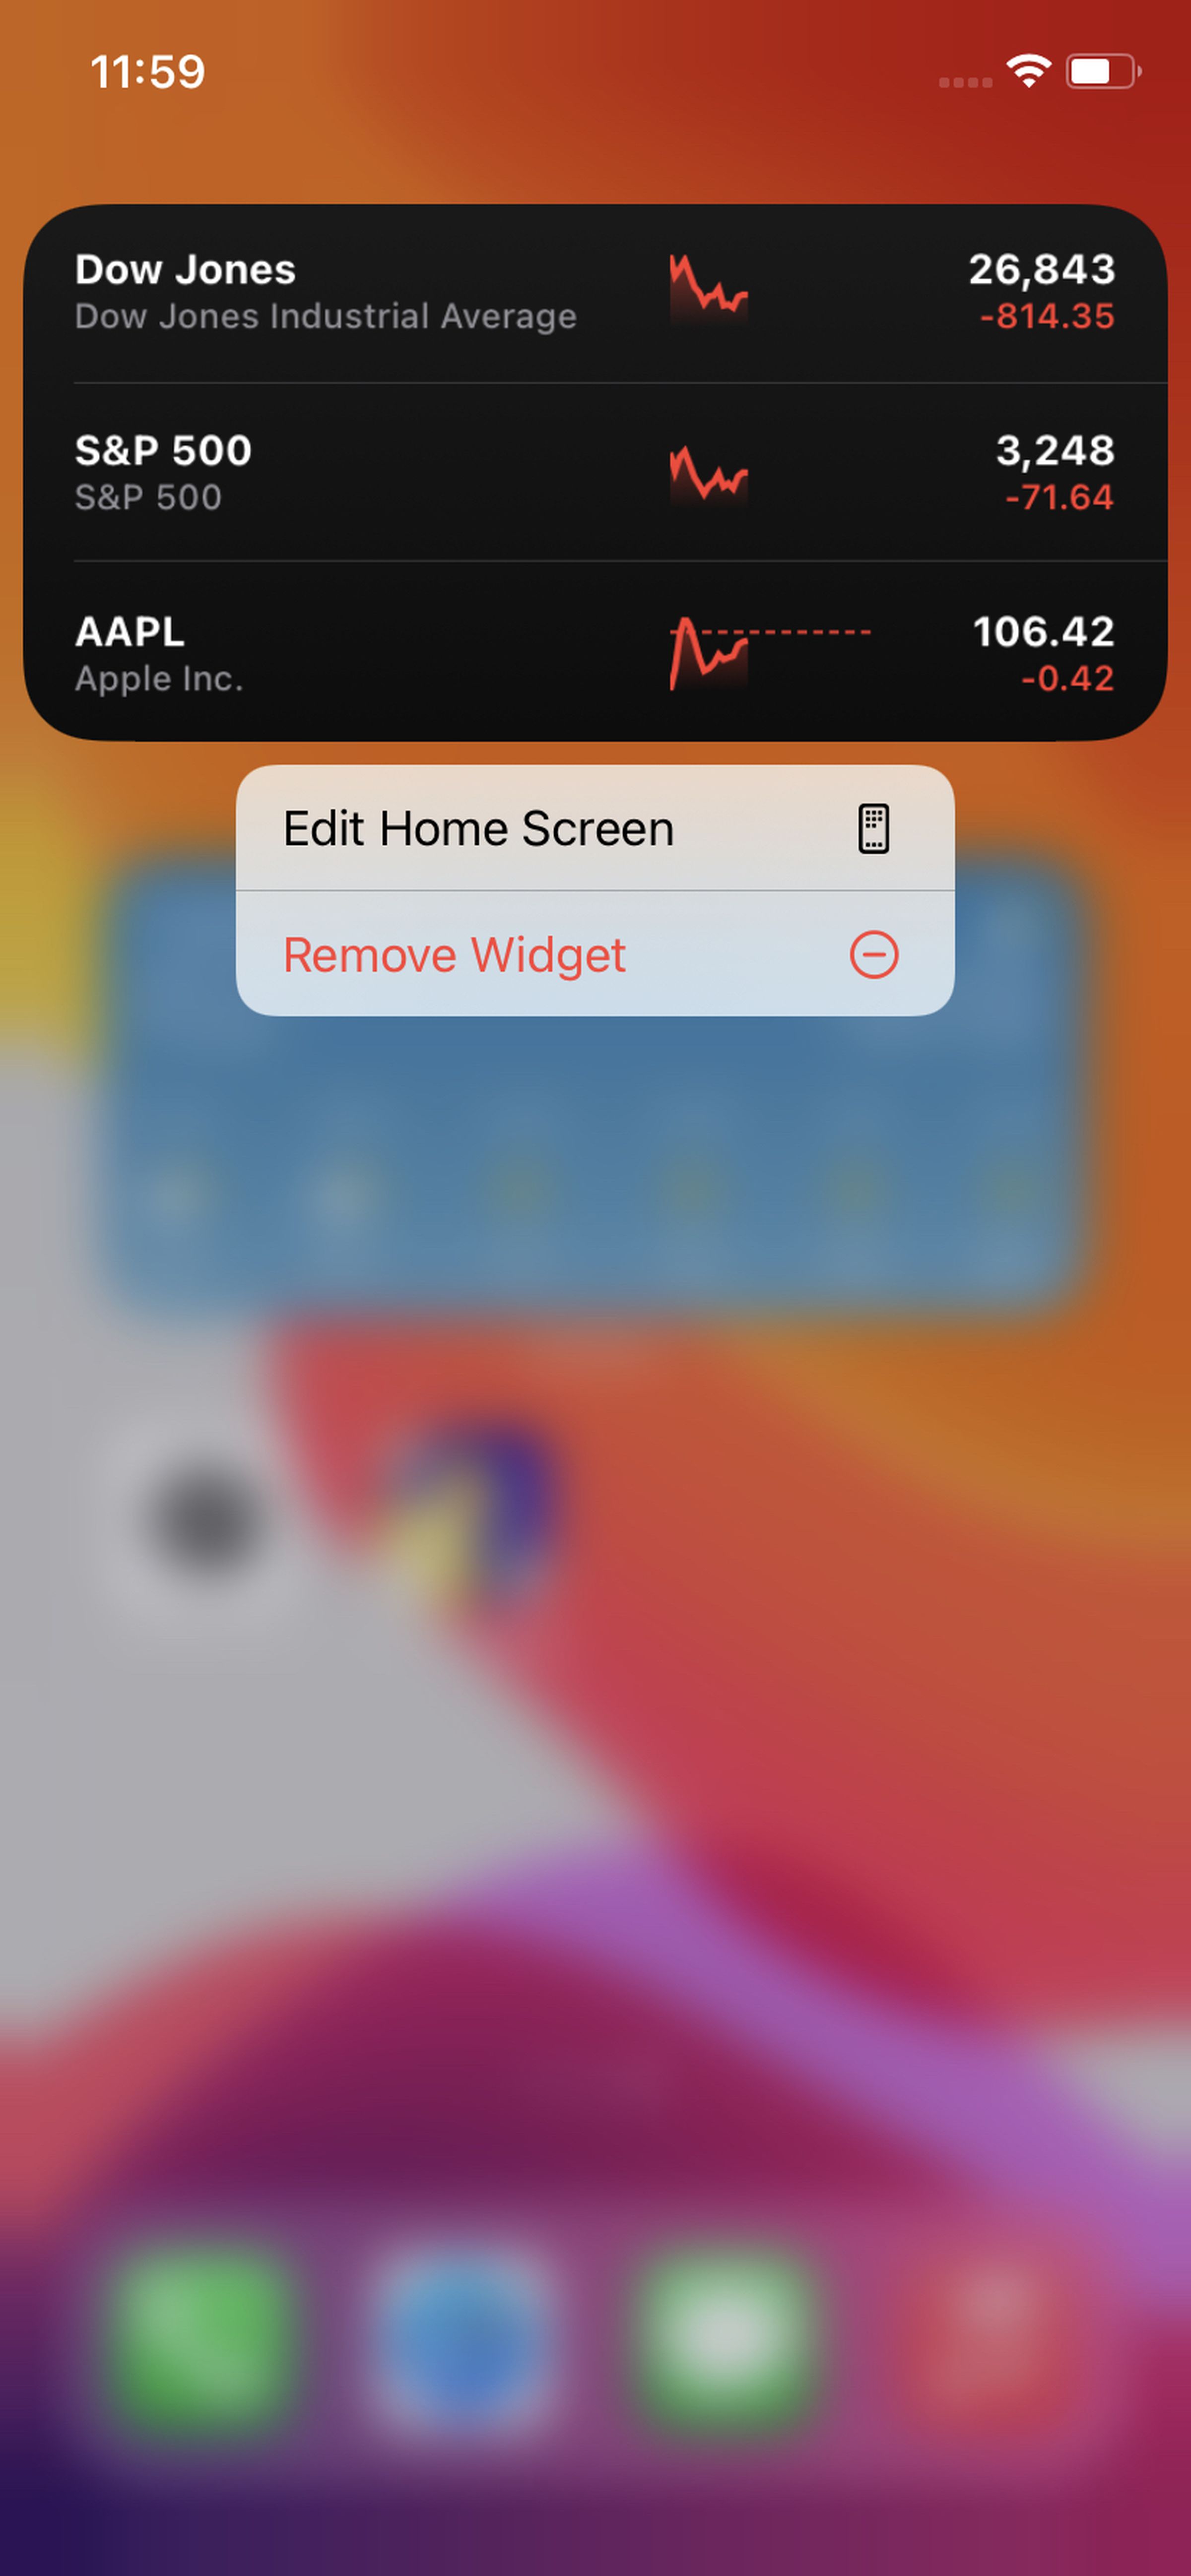 Long press on a widget to remove it.